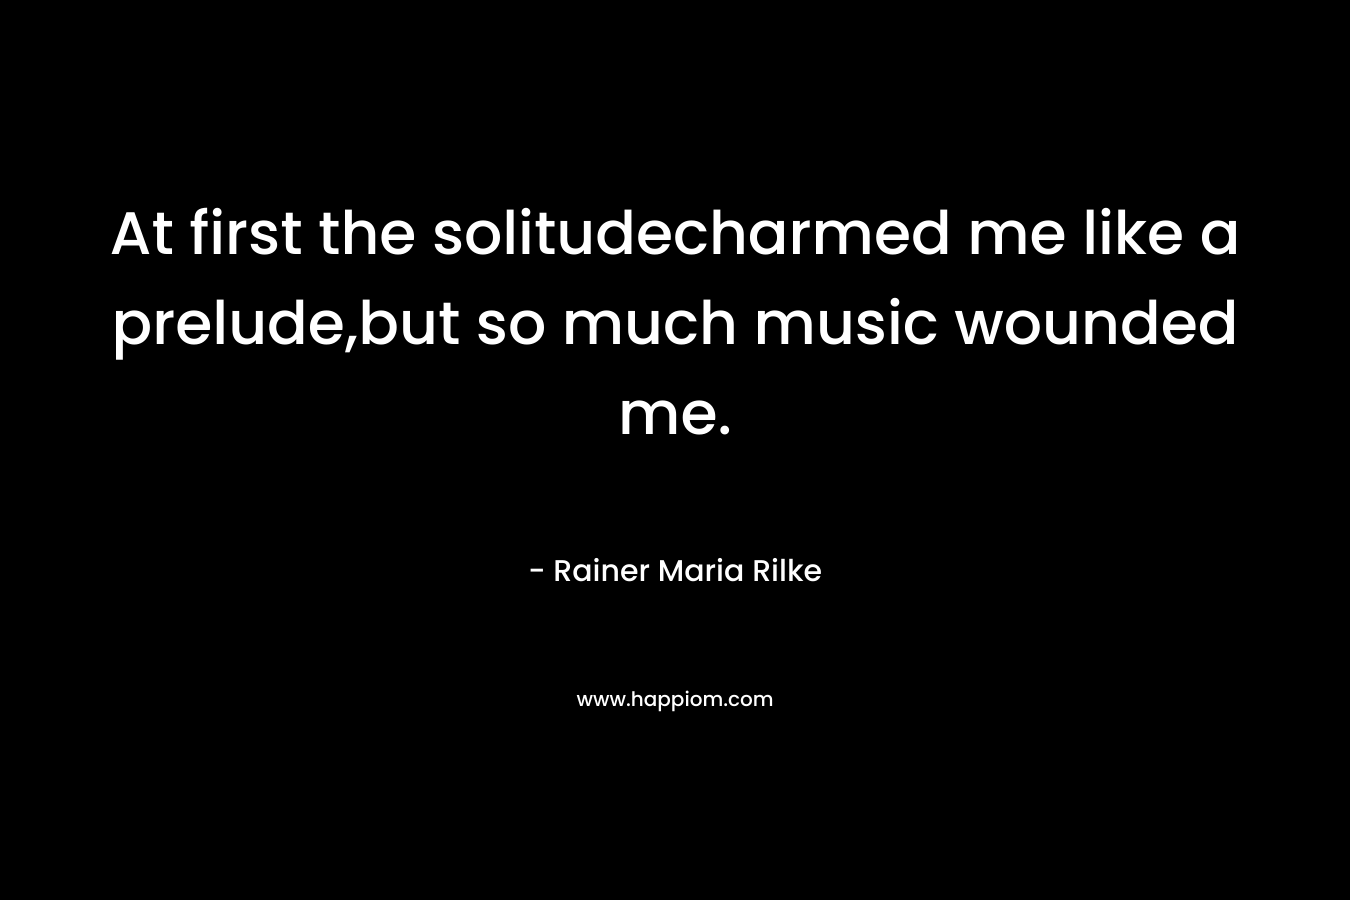 At first the solitudecharmed me like a prelude,but so much music wounded me.